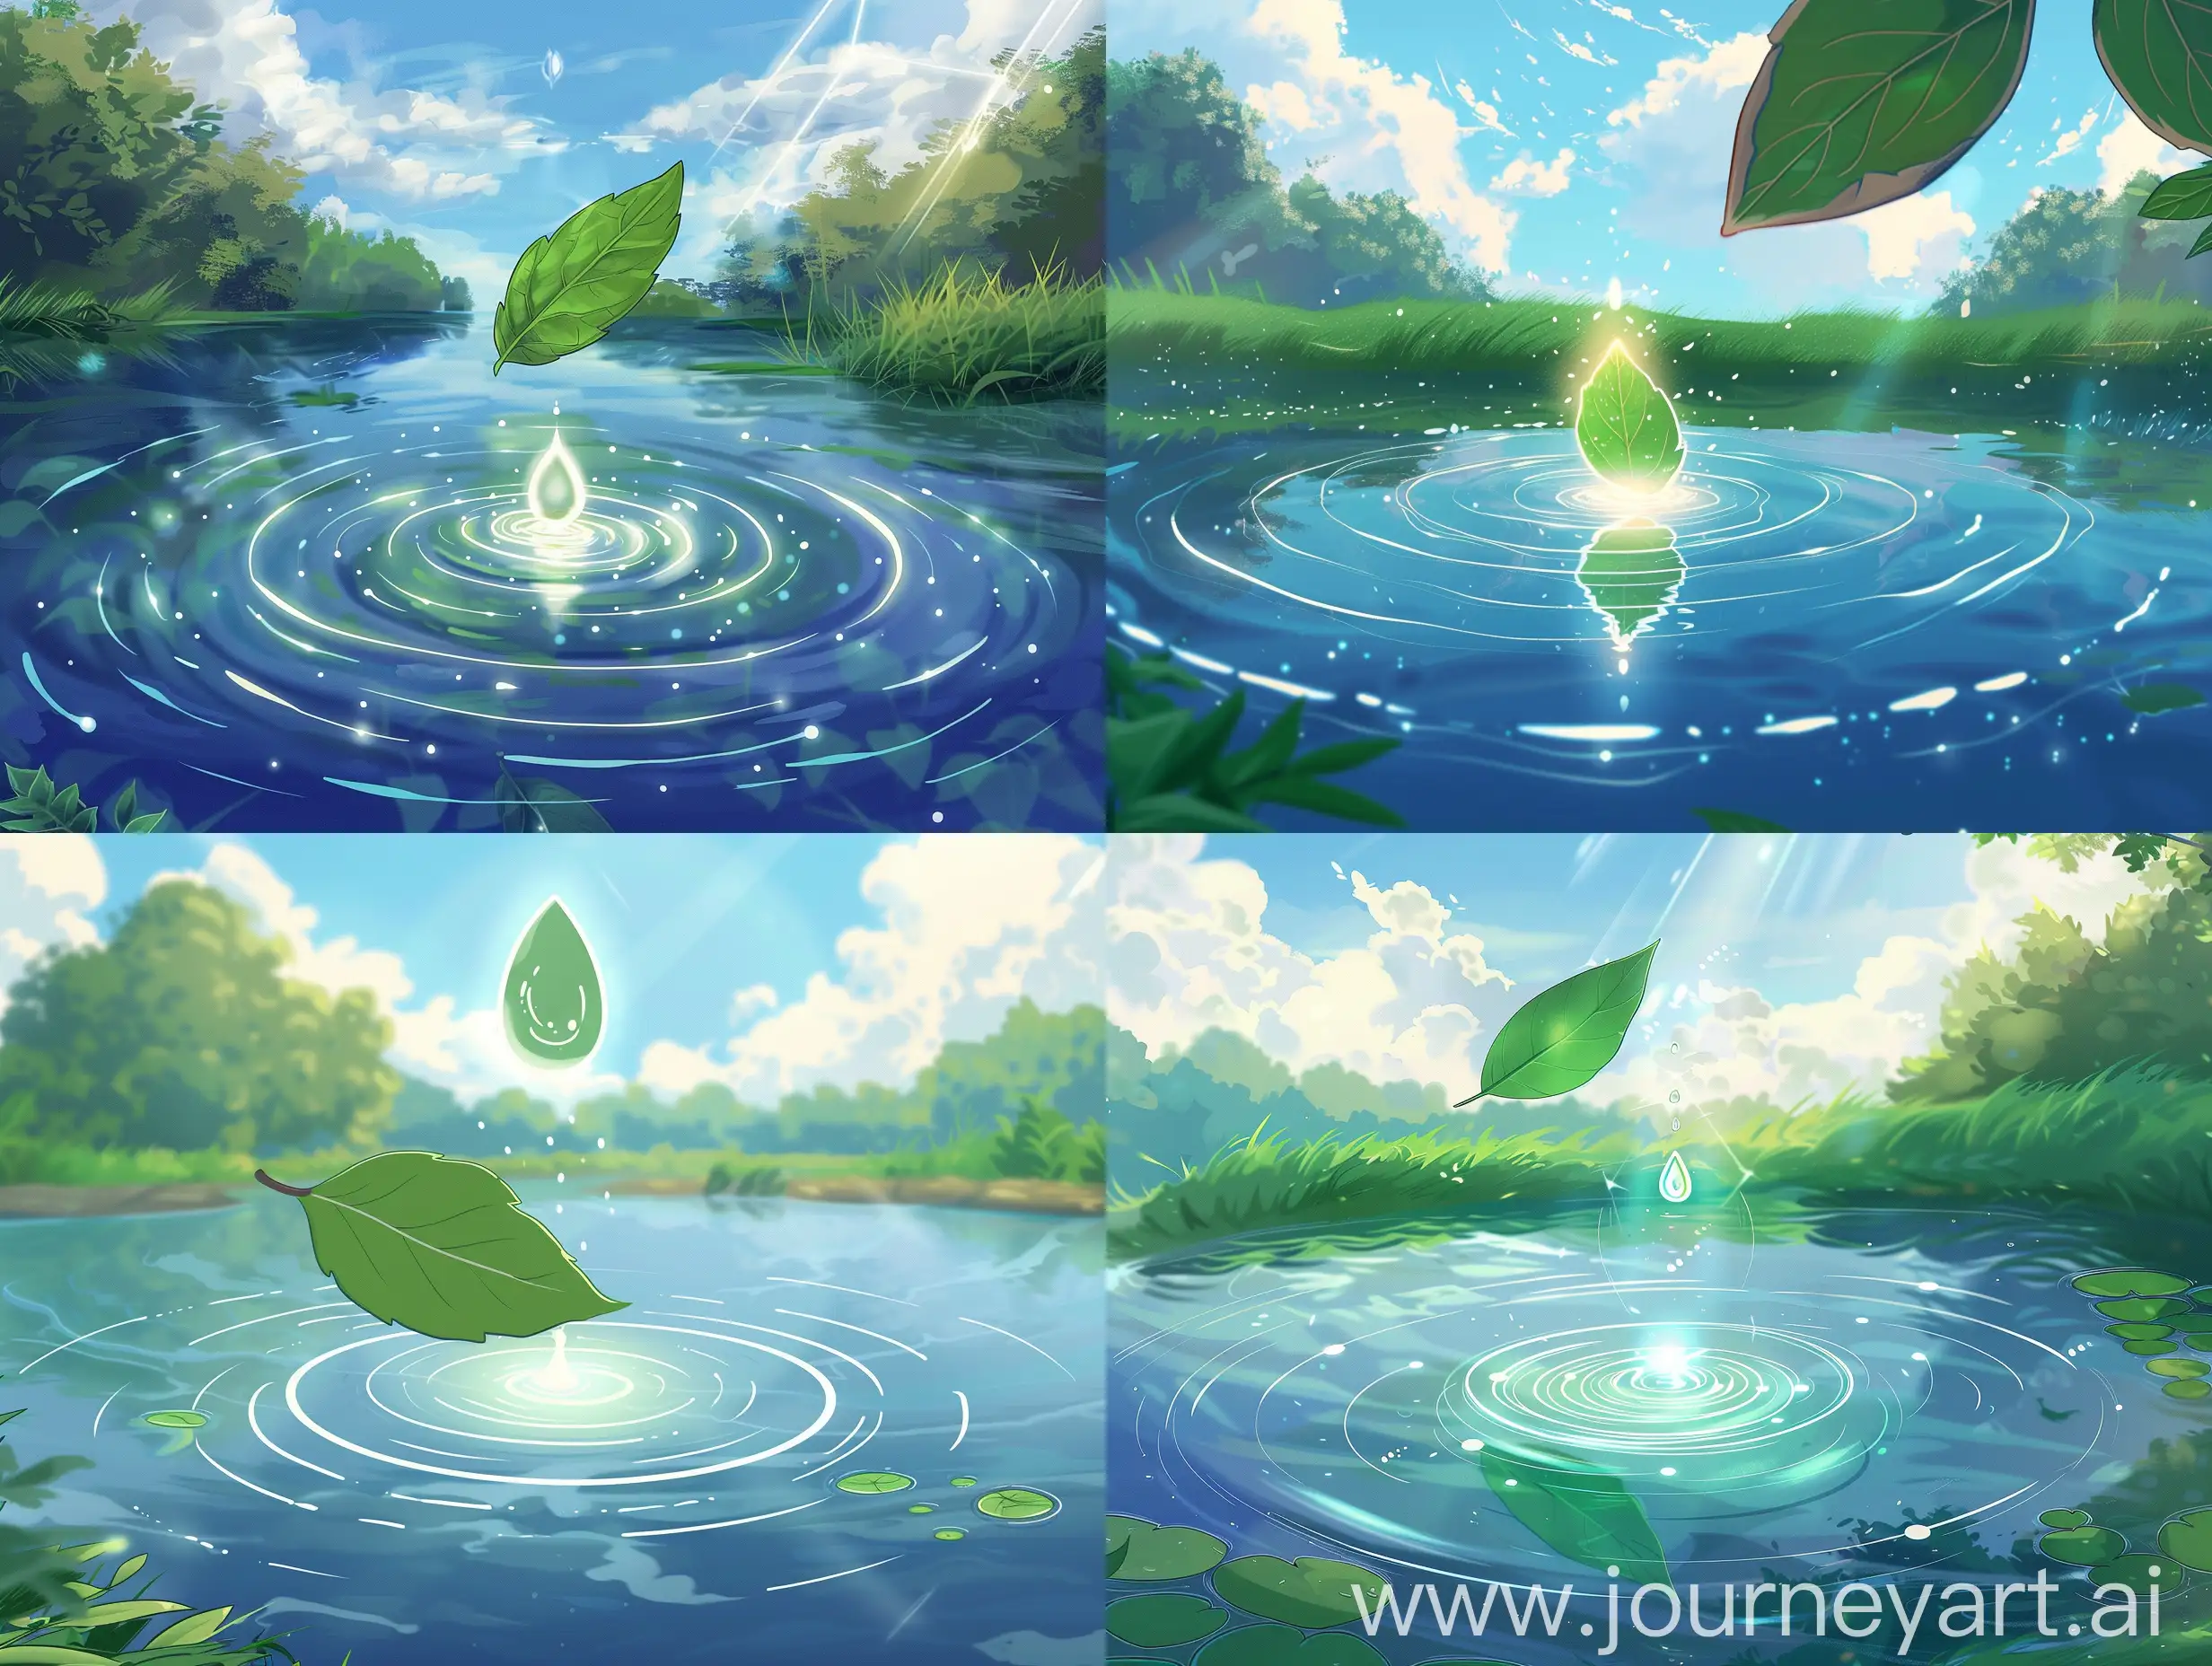 Anime style, green leaf over a calm pond.  Small circular waves surround the paper due to vibration, and above the paper there is a drop of water that glows because the sun's rays are reflected in it.  The pond of water reflects the blue sky and white clouds.  The background shows some trees and grass.